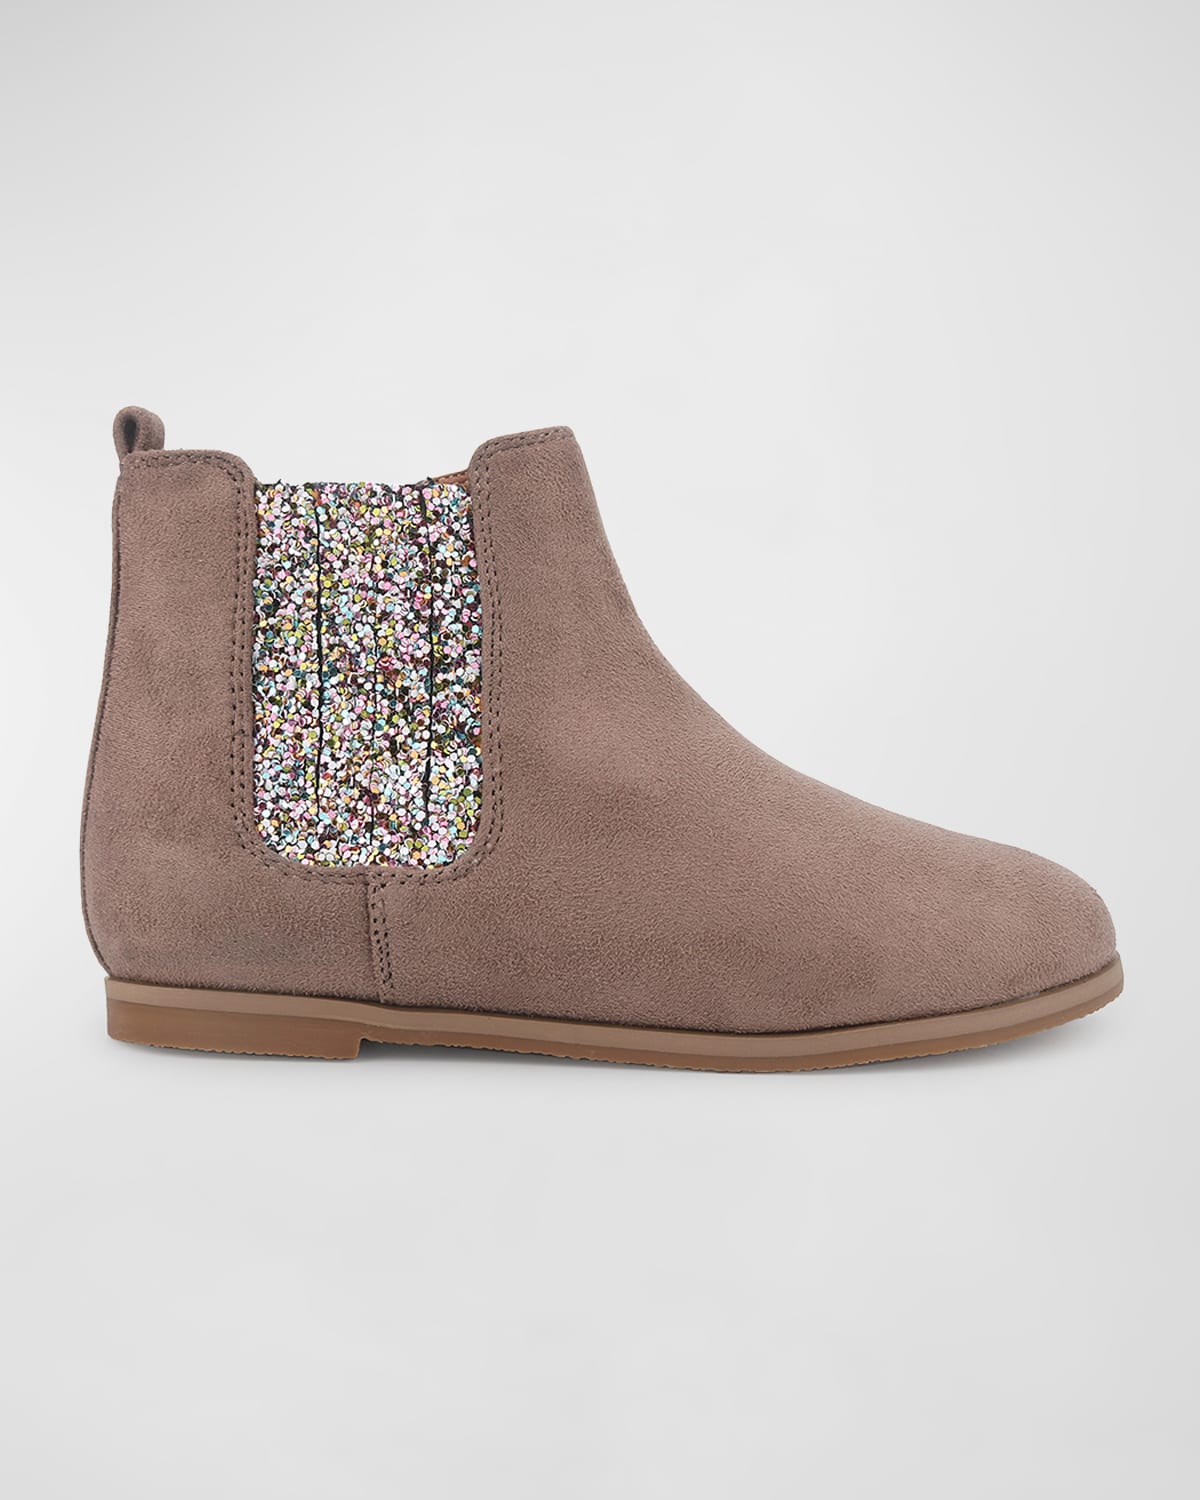 Yosi Samra Girl's Miss Mollie Suede Chelsea Boots, Toddler/kids In Taupe